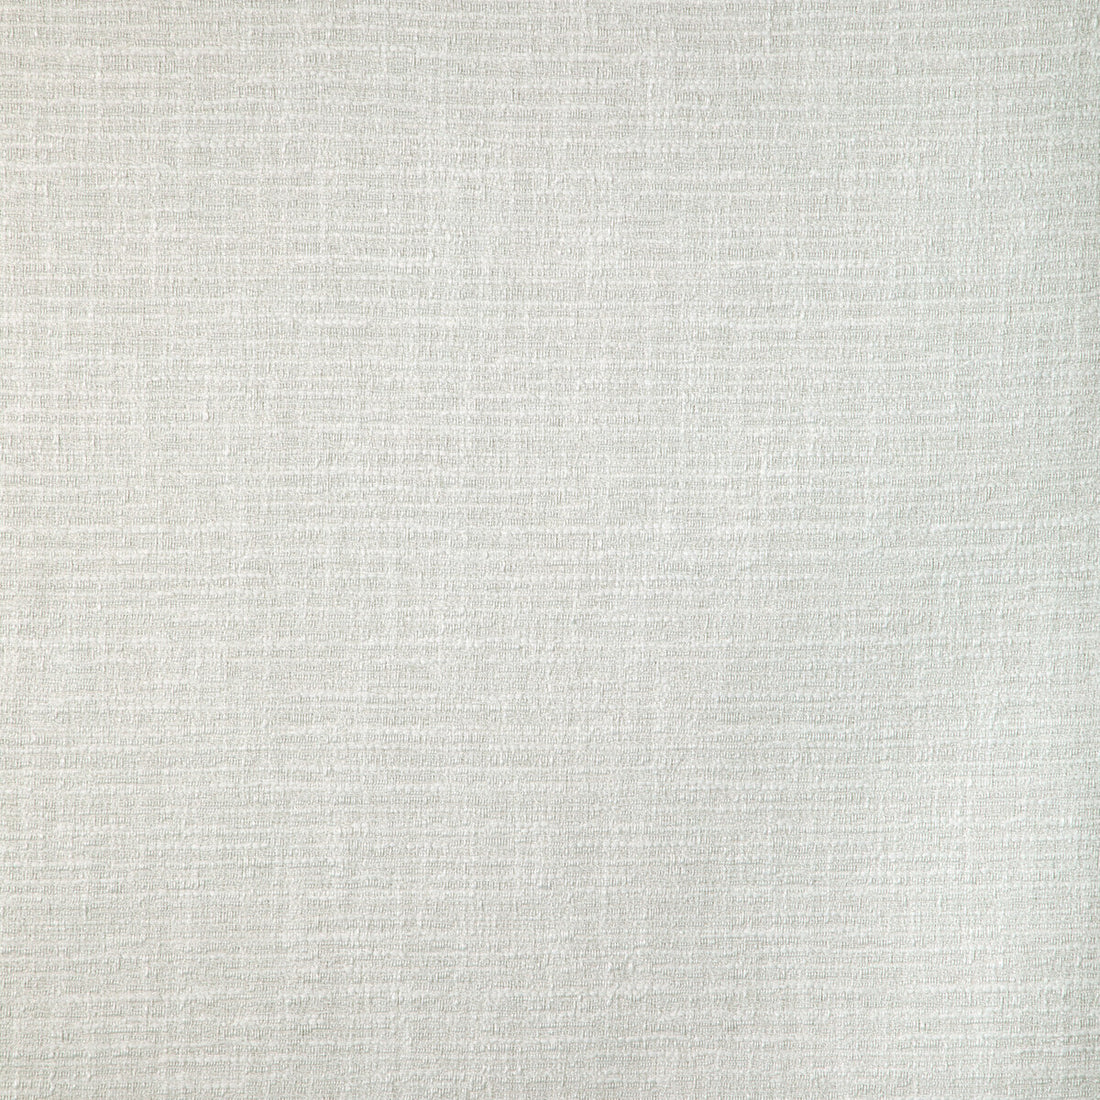 Bellows fabric in salt color - pattern 37048.101.0 - by Kravet Design in the Thom Filicia Latitude collection